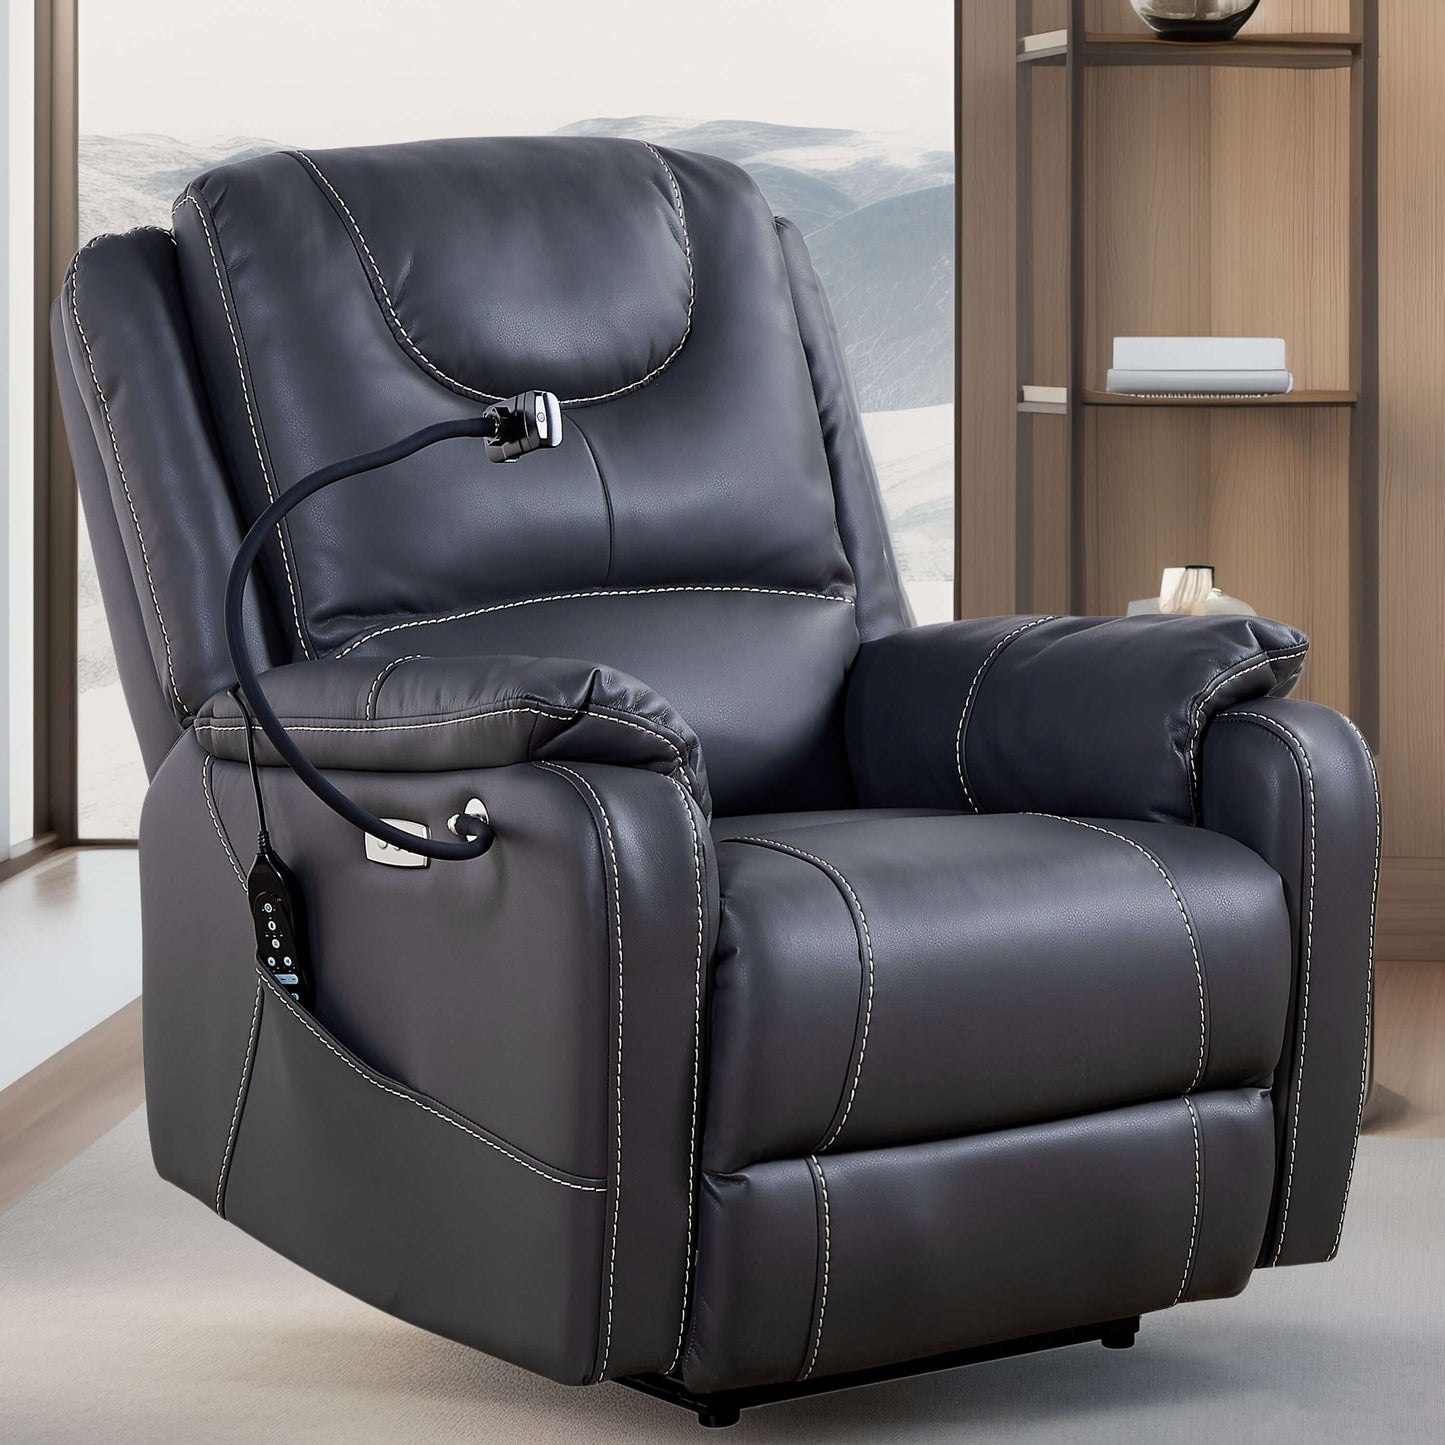 Power Zero Gravity Chair: Electric Recliner with Heat and Massage, Side Pockets,USB Port - Scratch Resistant Eco Leather Black